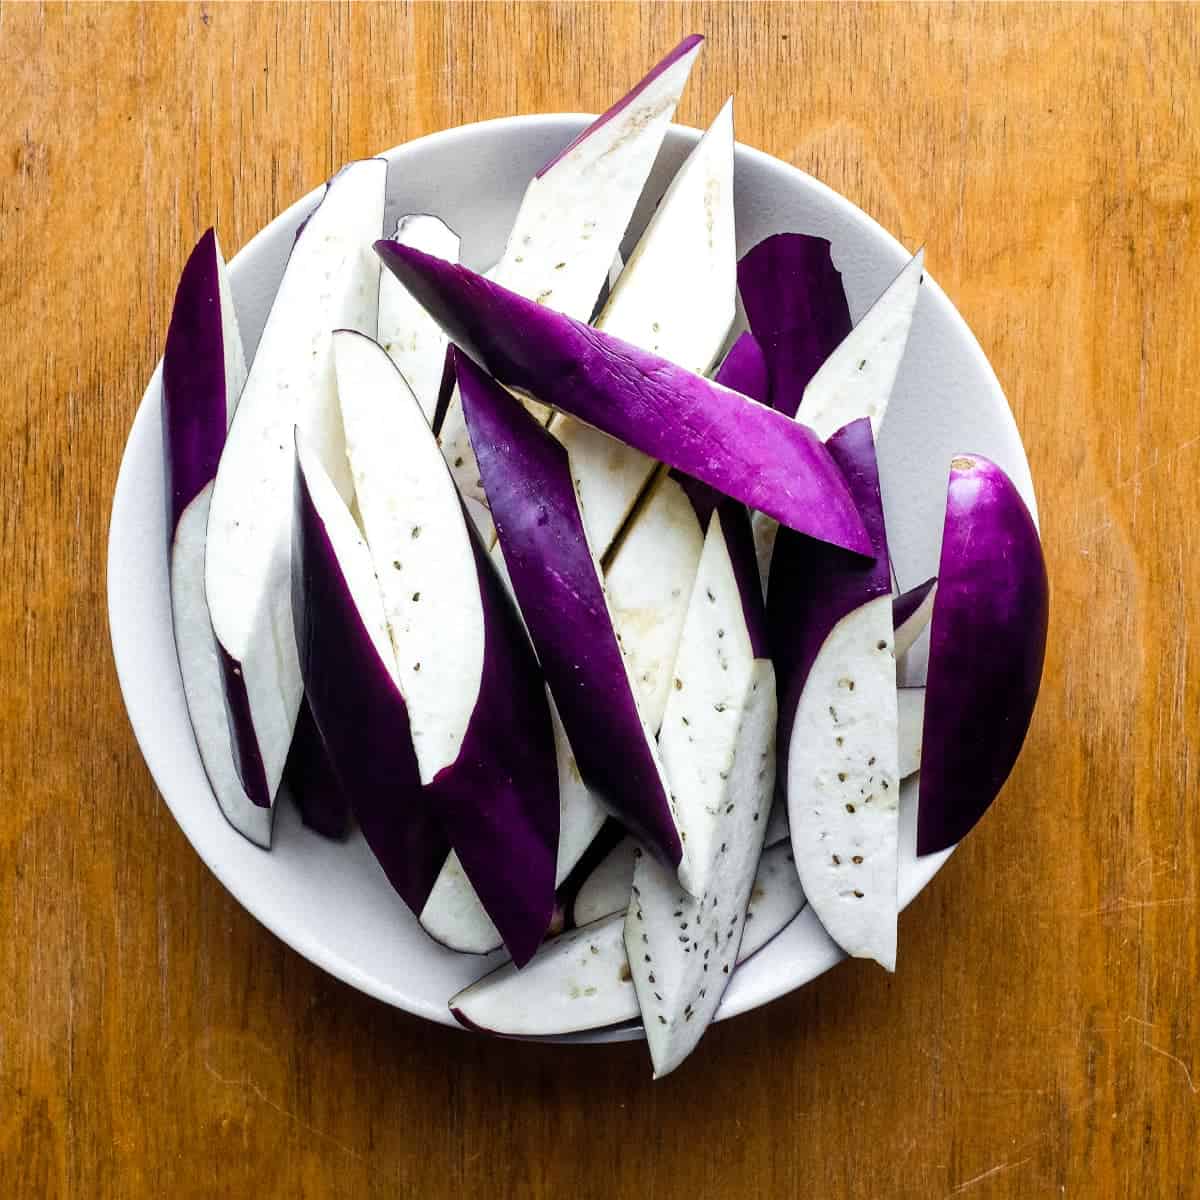 Chinese eggplant cut into long, thick batons.